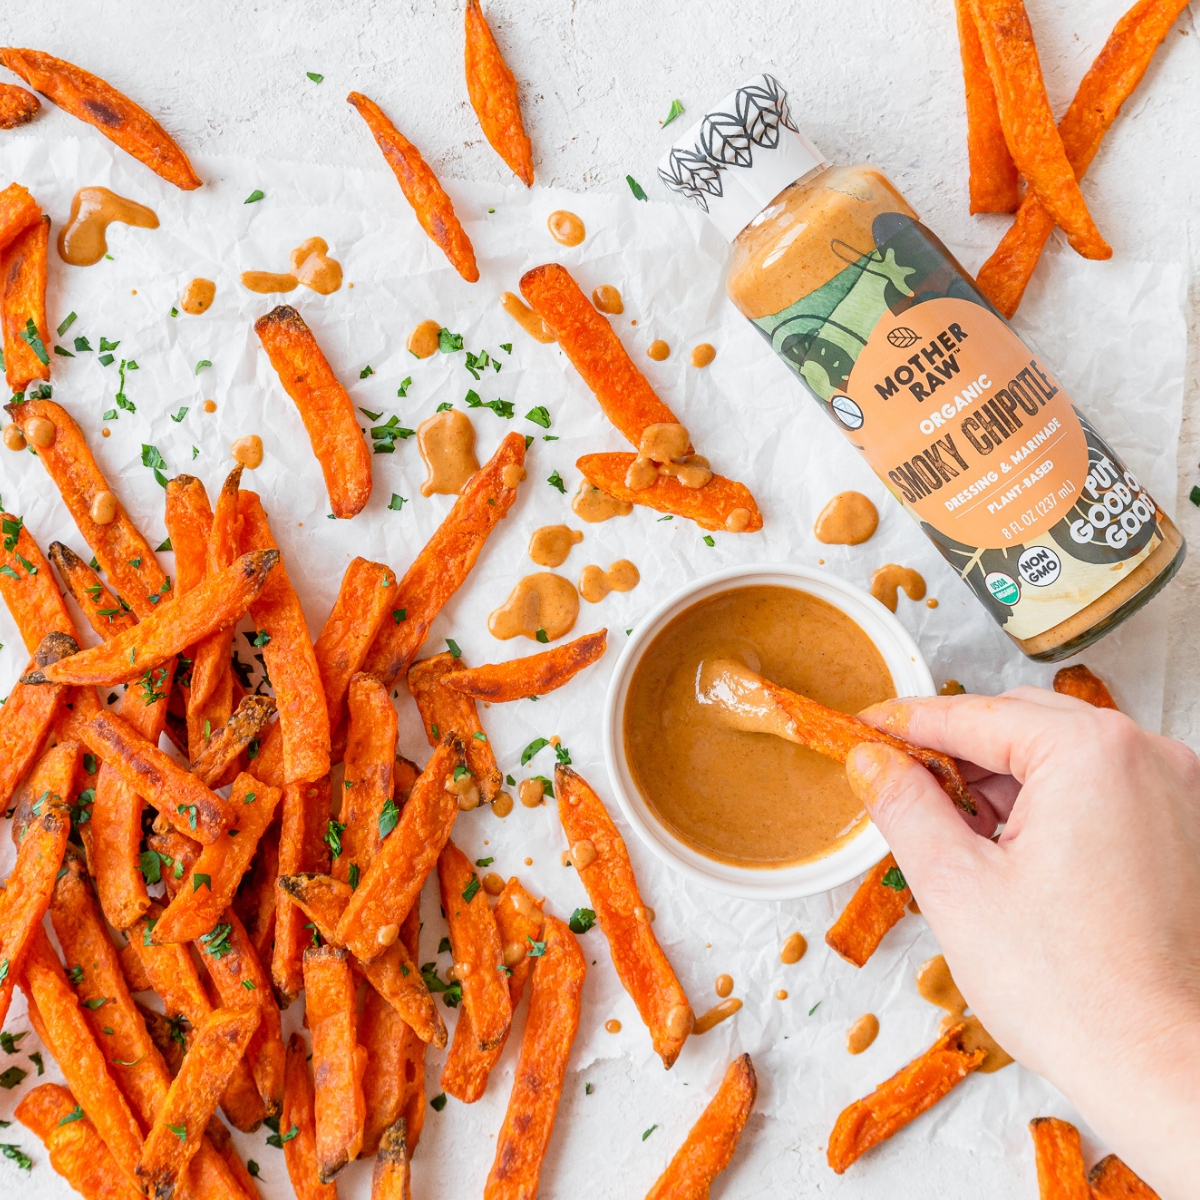 Smoky Chipotle Ranch Bottle with Sweet Potator Fries